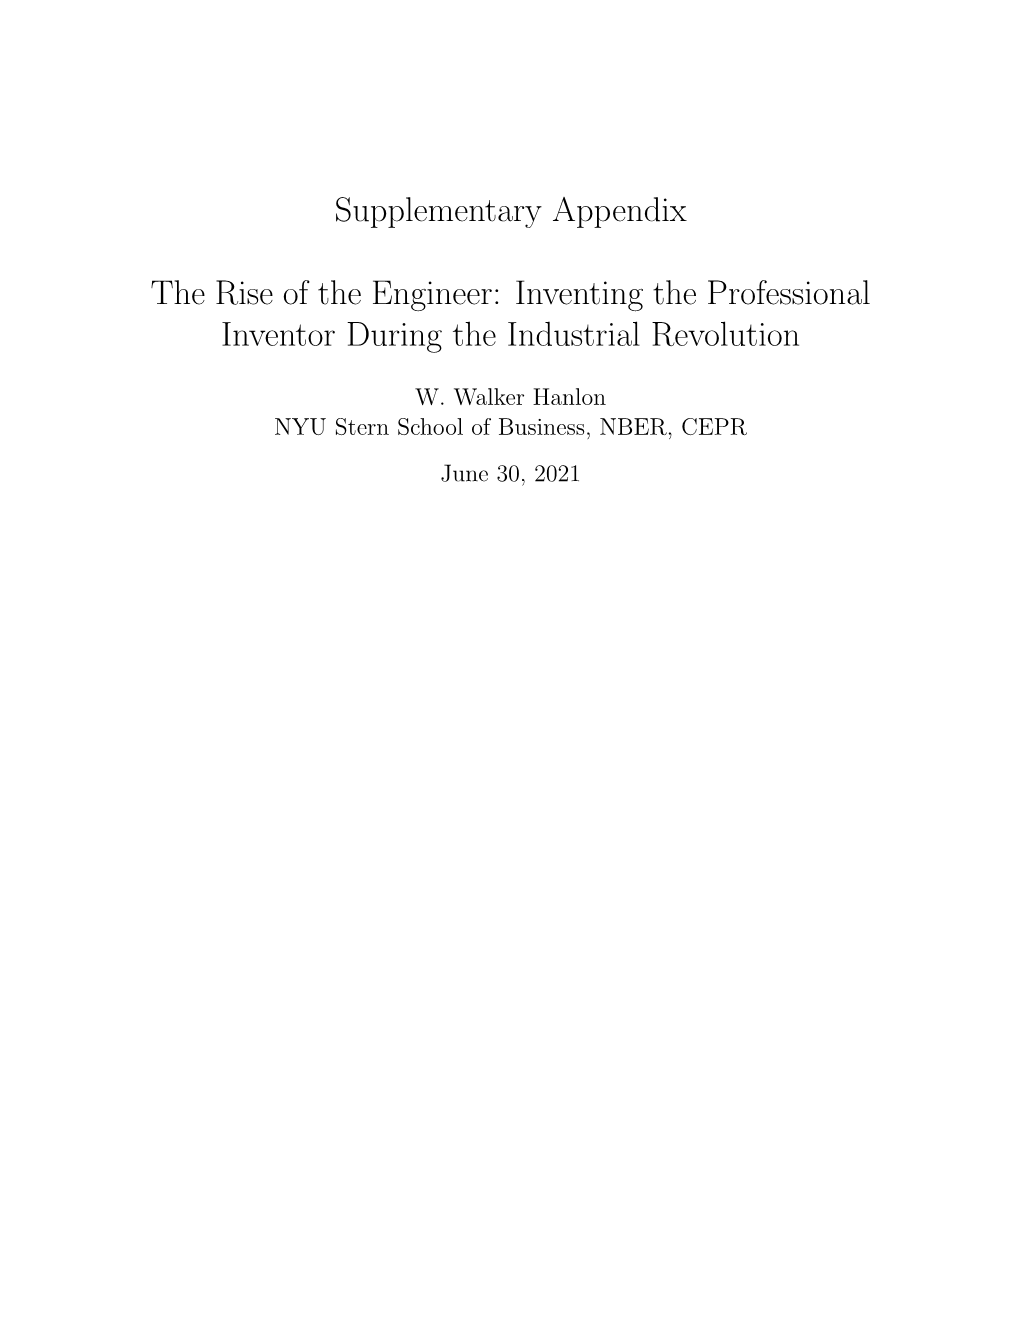 Supplementary Appendix the Rise of the Engineer